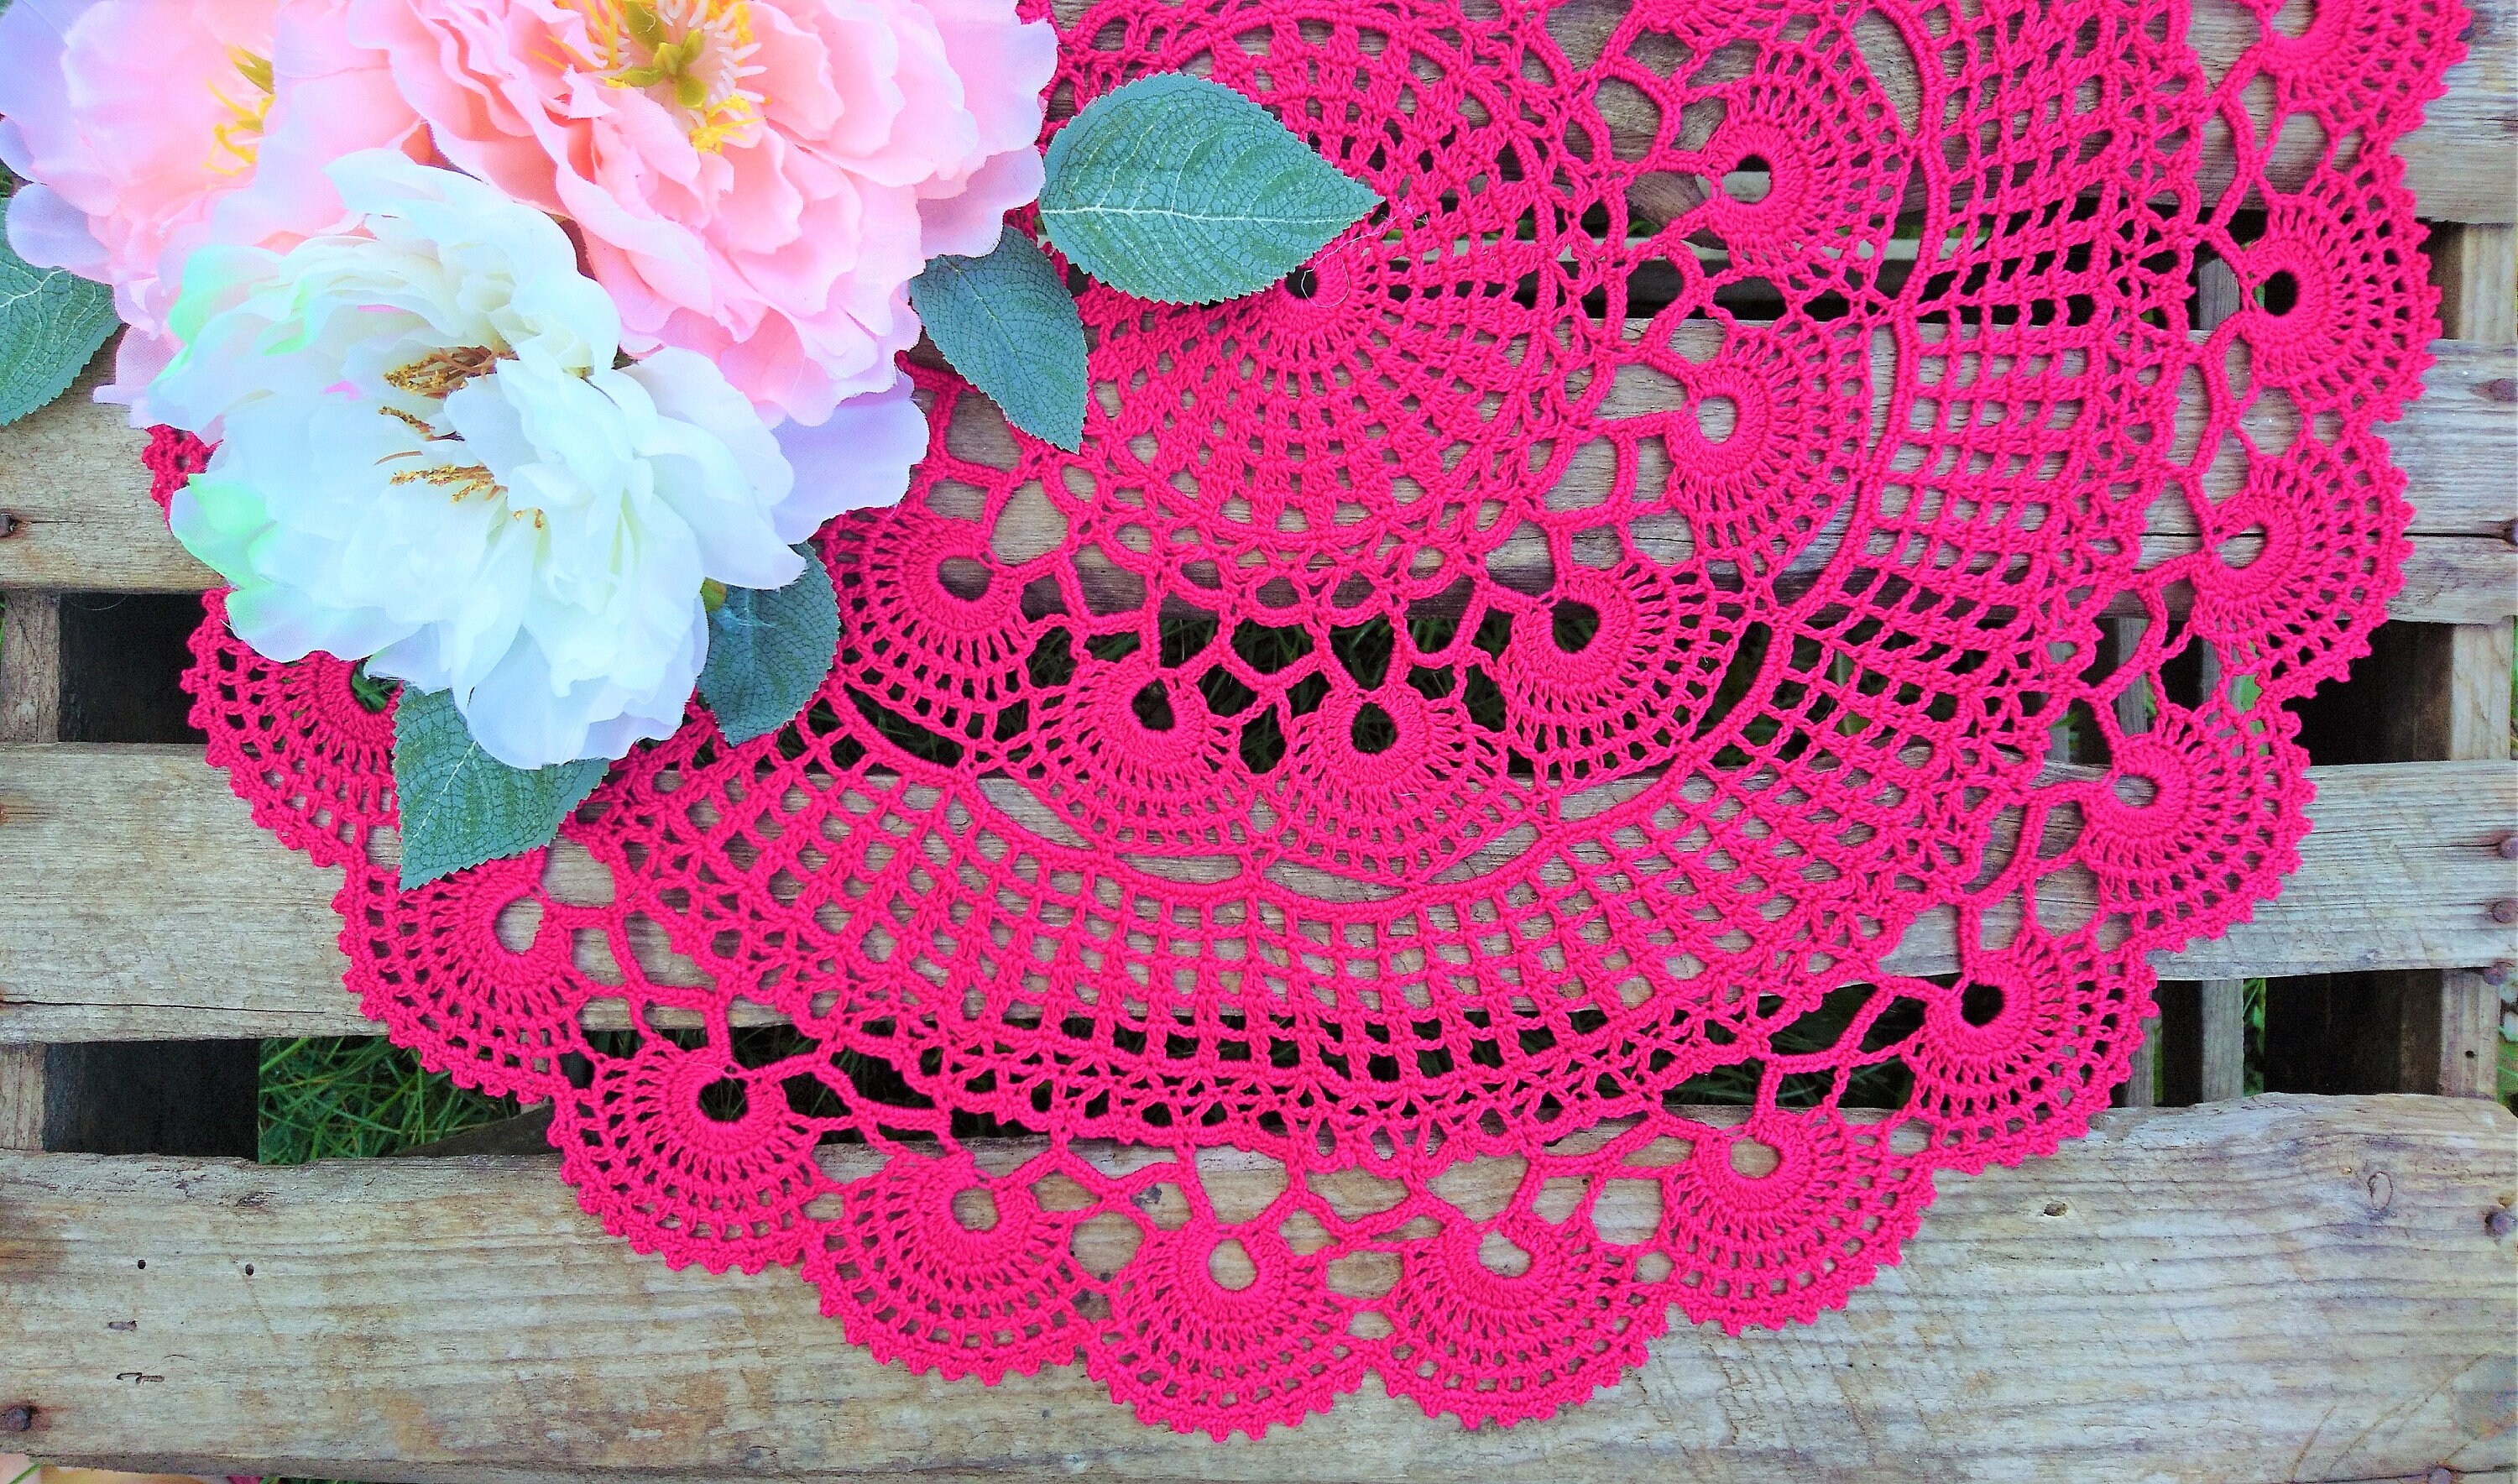 crocheted doily pink Round lace READY TO SHIP centerpiece decor 15 inches